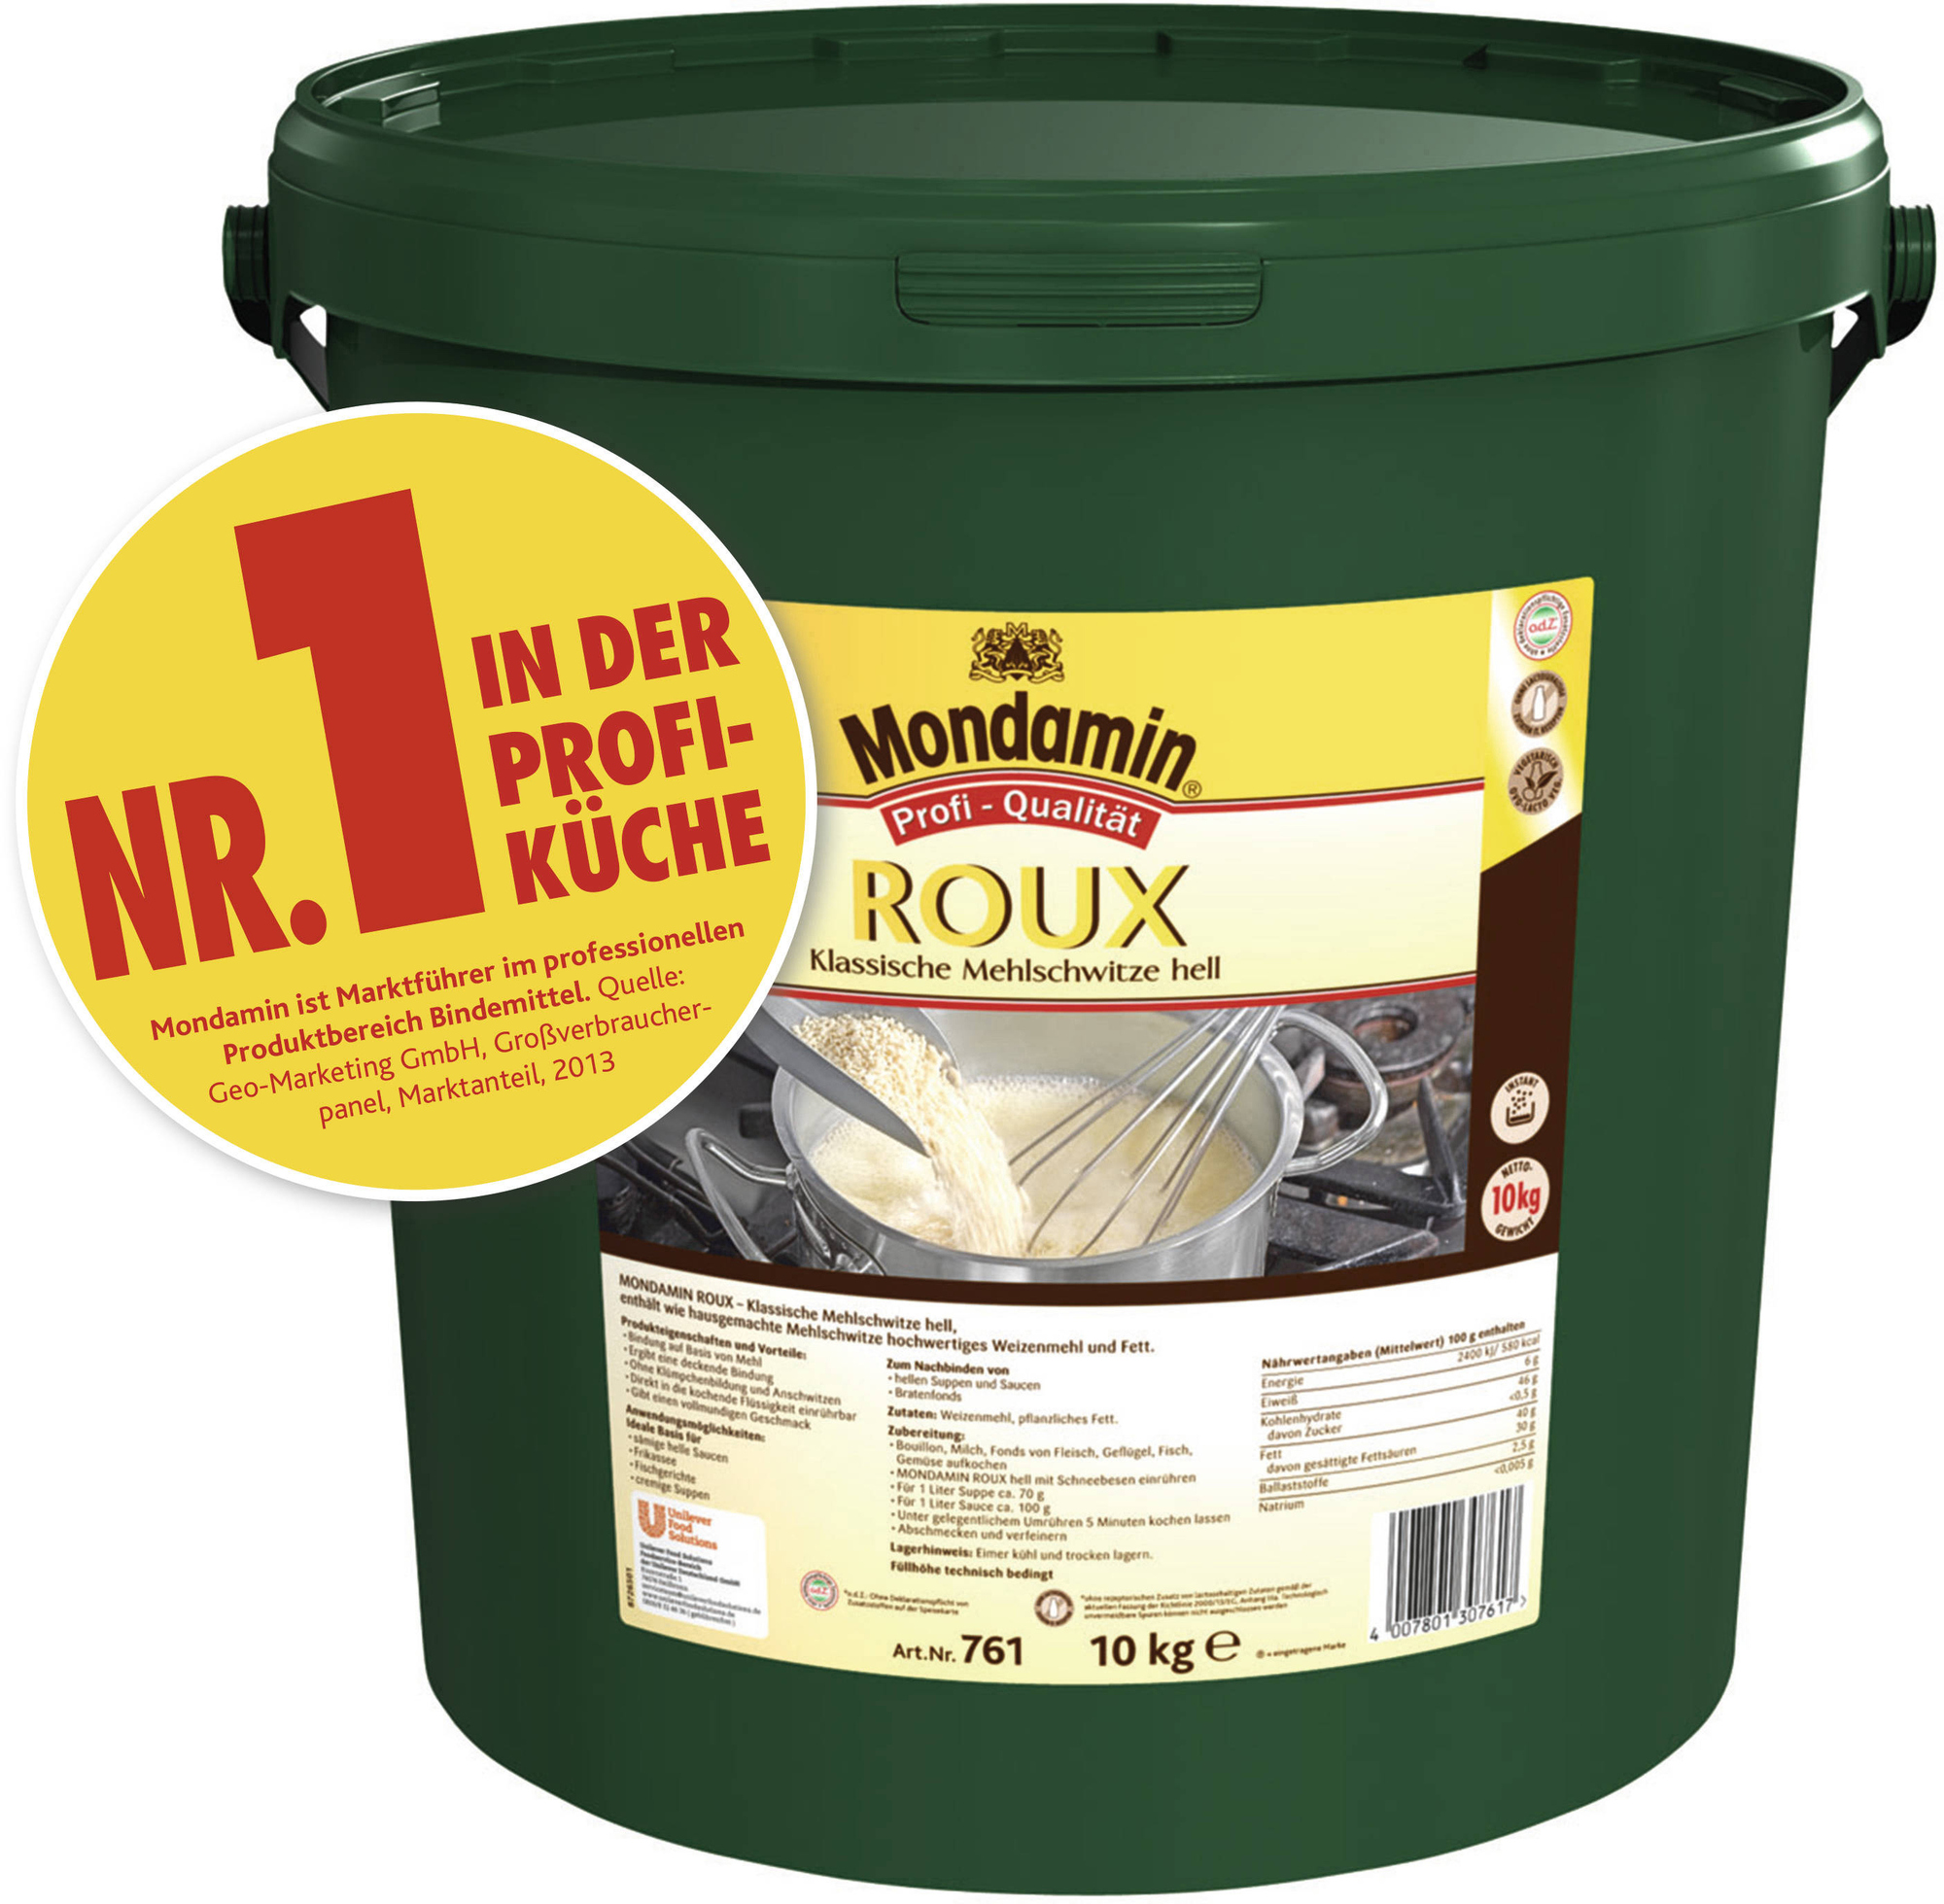 Roux hell 10kg